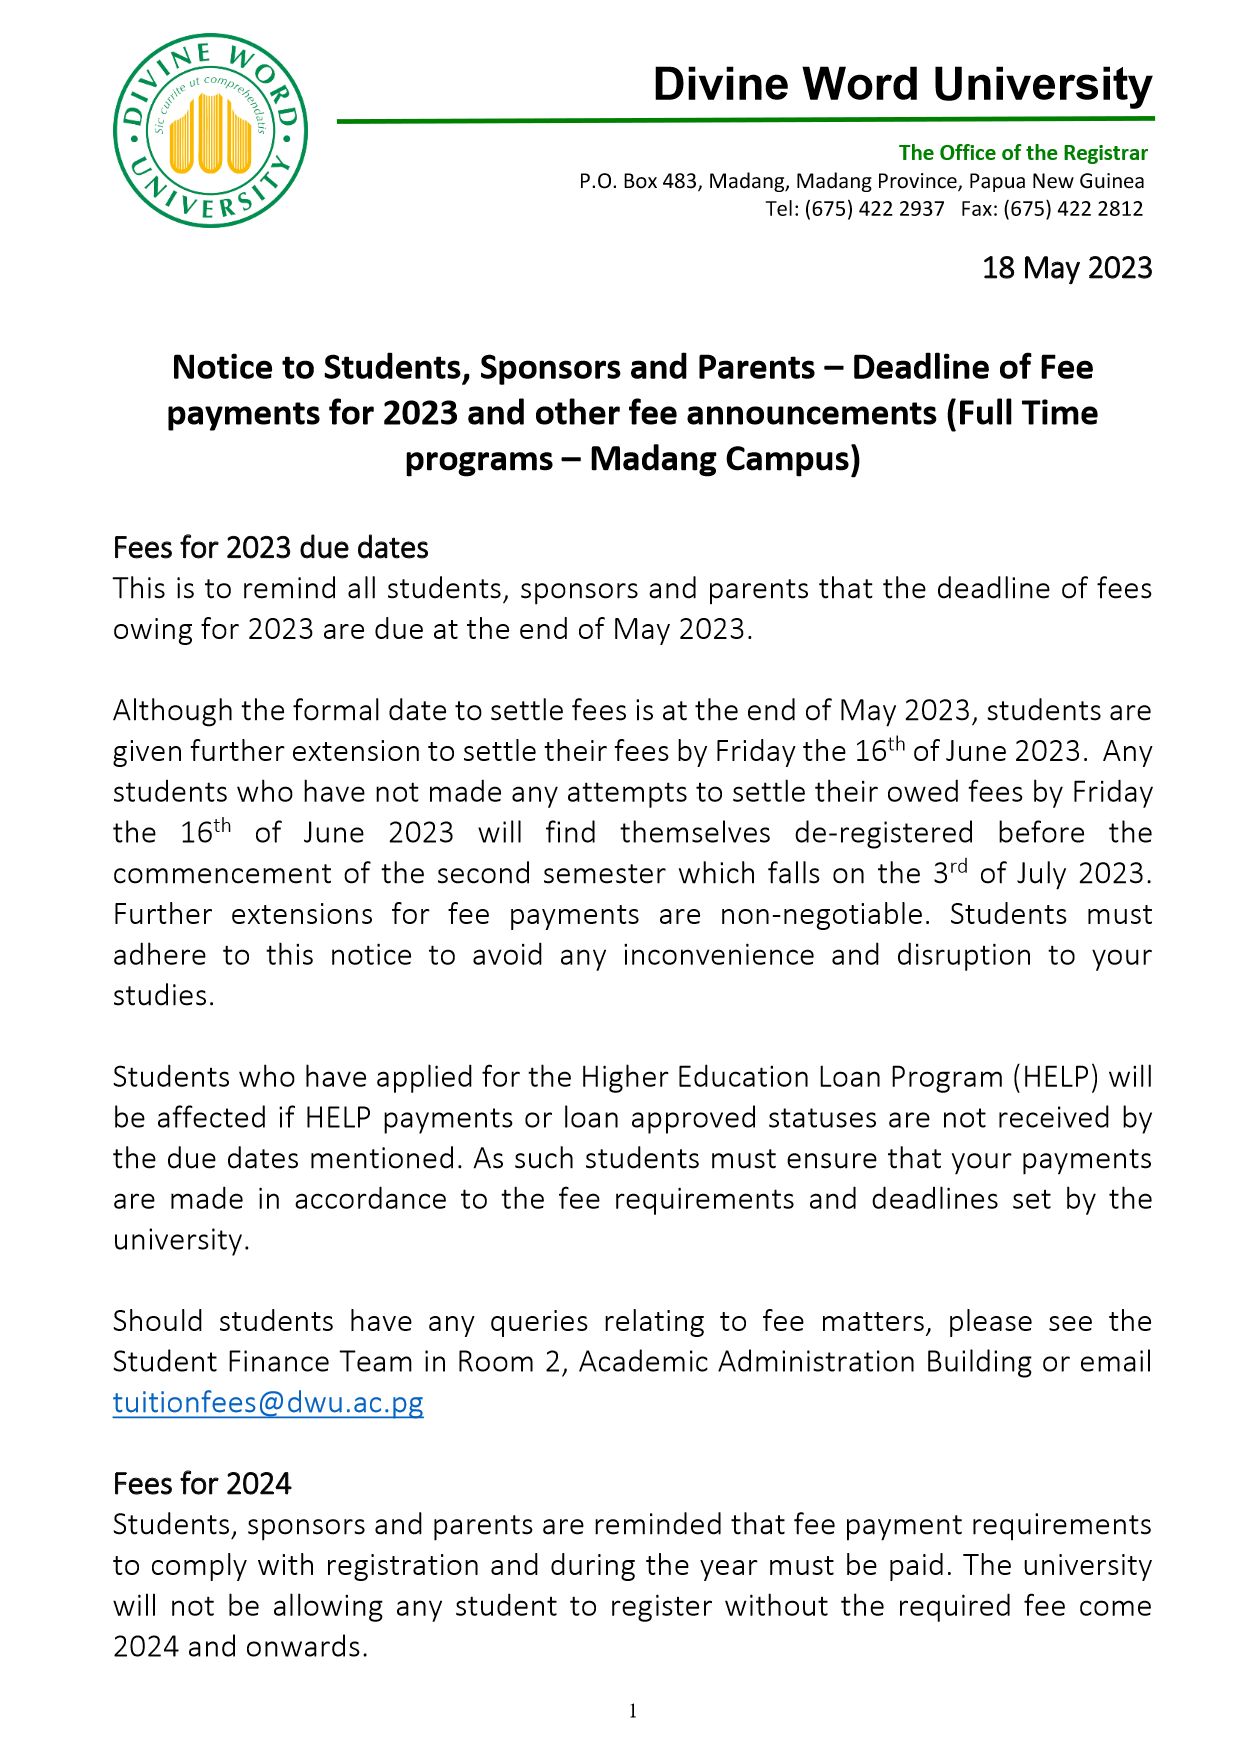 Notice to all students concerning fees 2023 and 2024 1